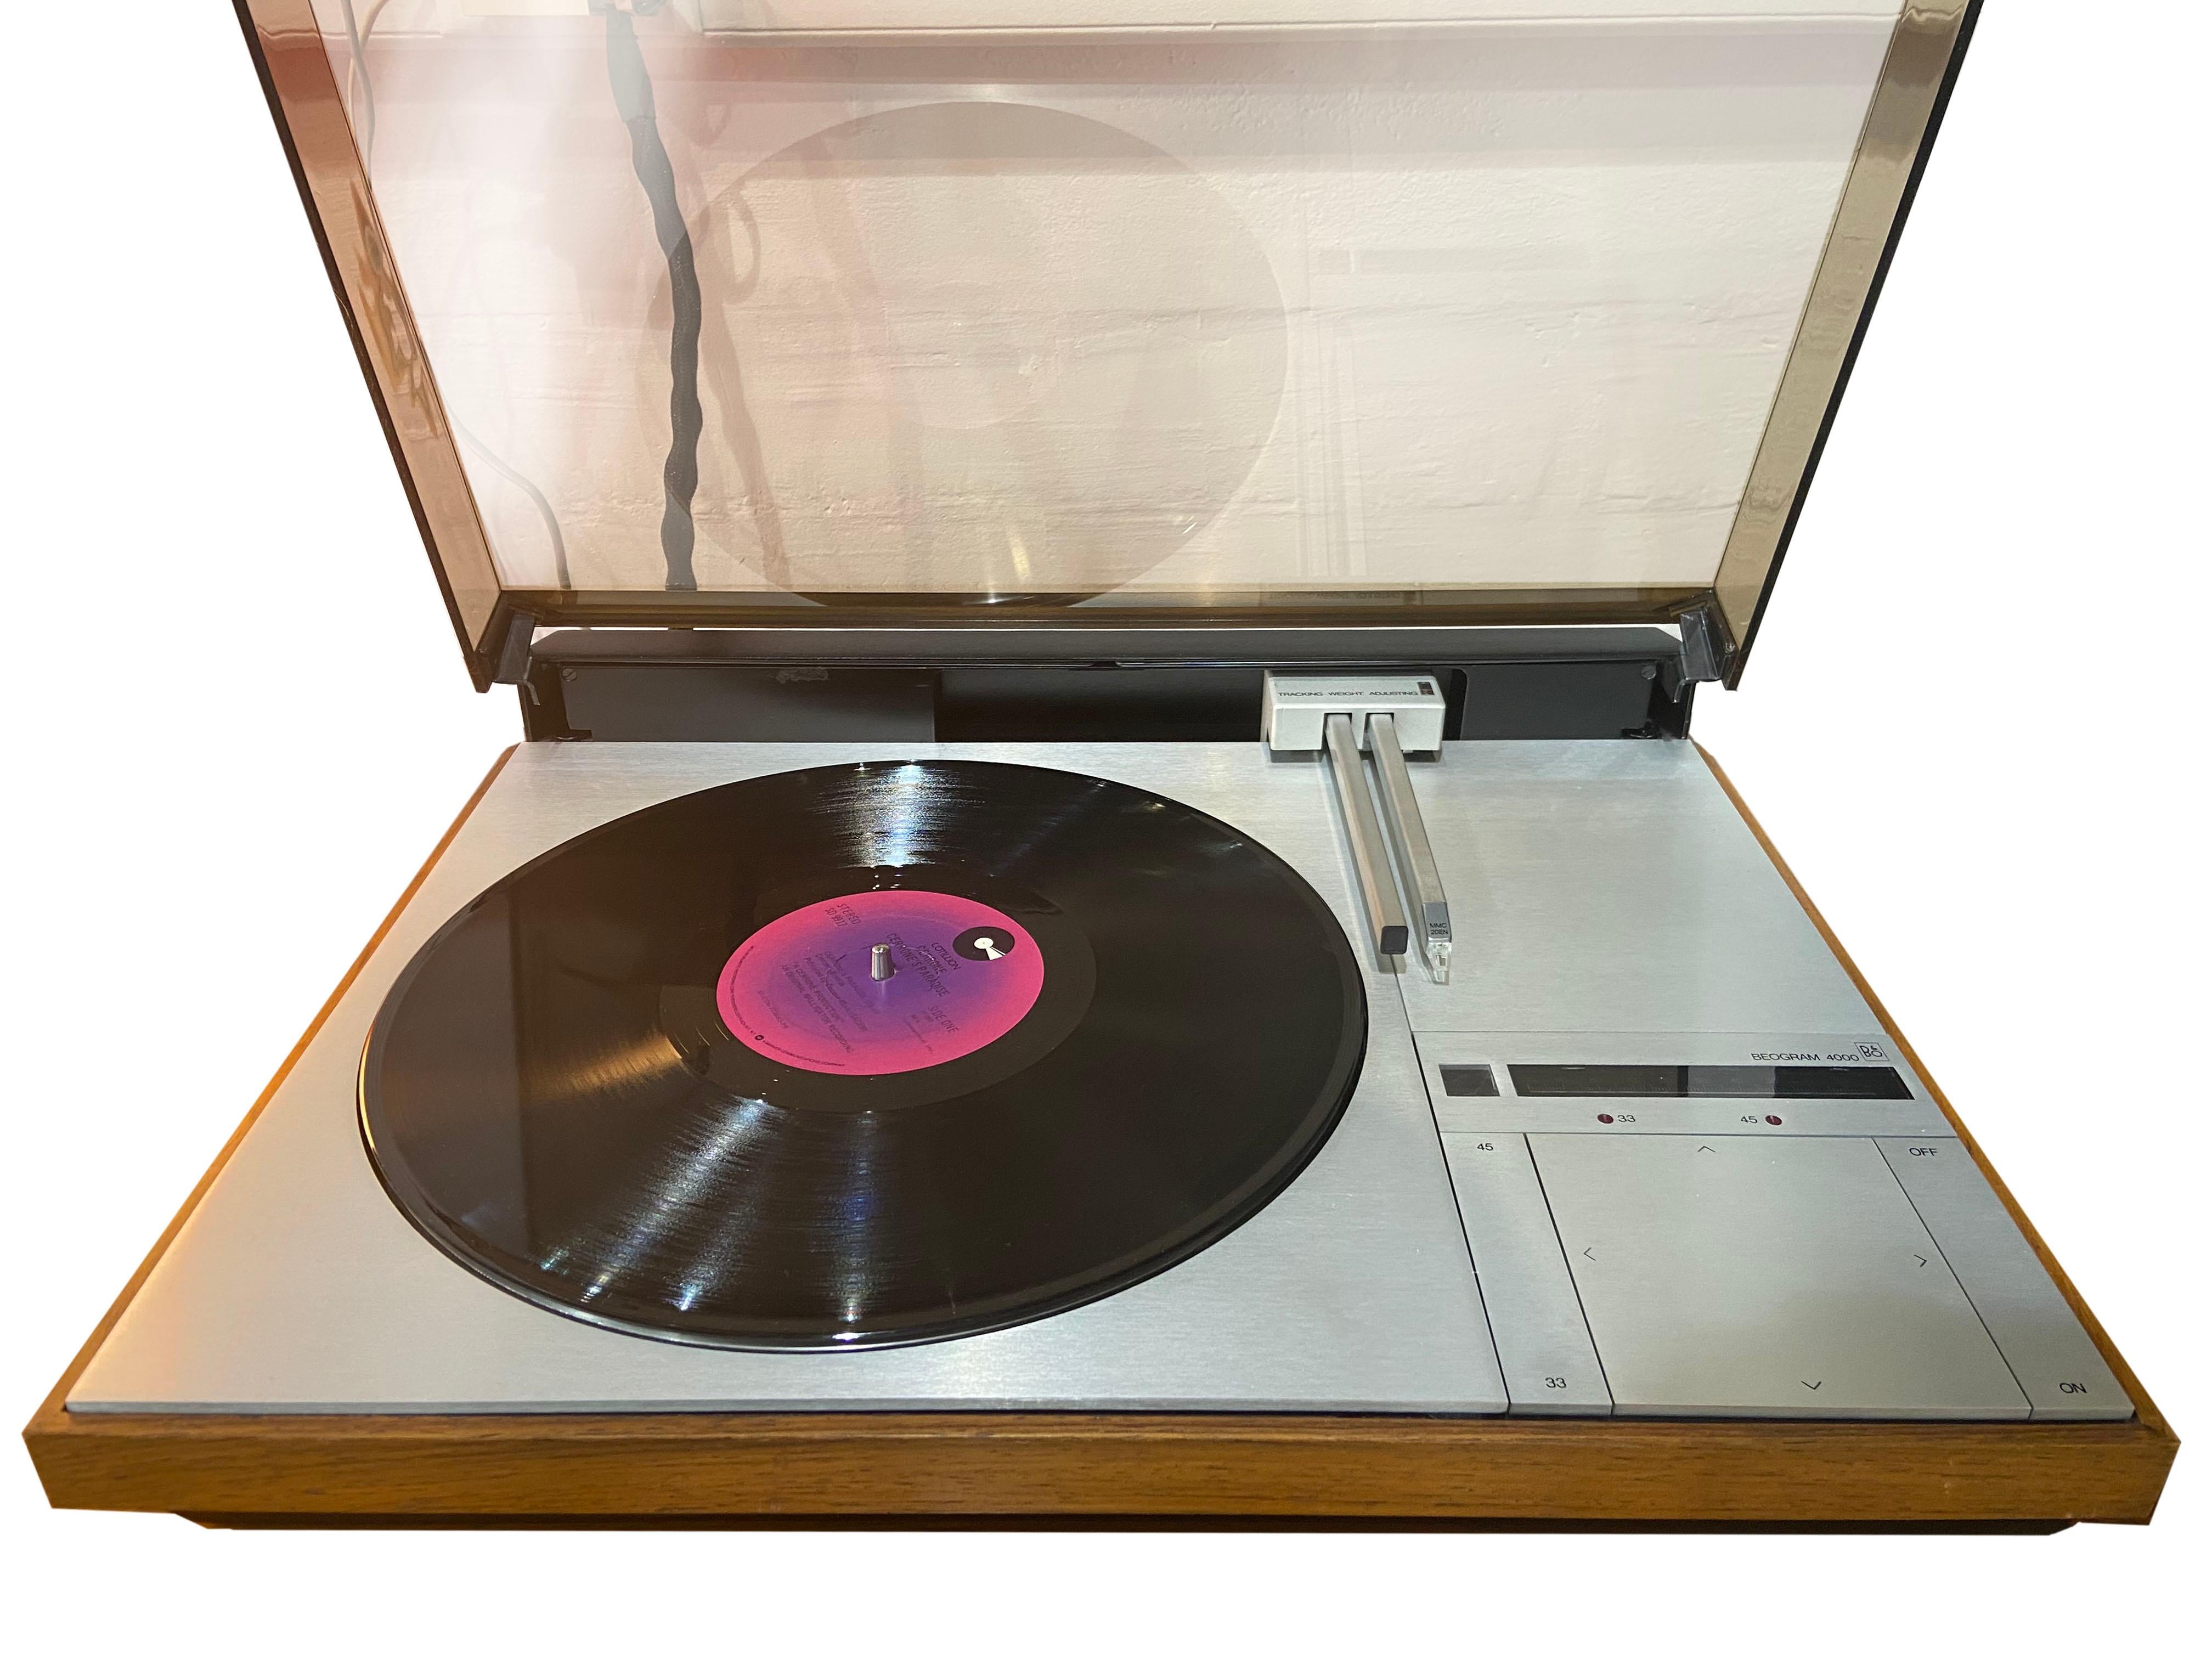 Bang & Olufsen
mythical Beogram 4000
tangential arm turntable
new condition
revised
circa 1980
rosewood / stainless steel
B&O is currently reissuing a series from 10 to more than 8000 euros.